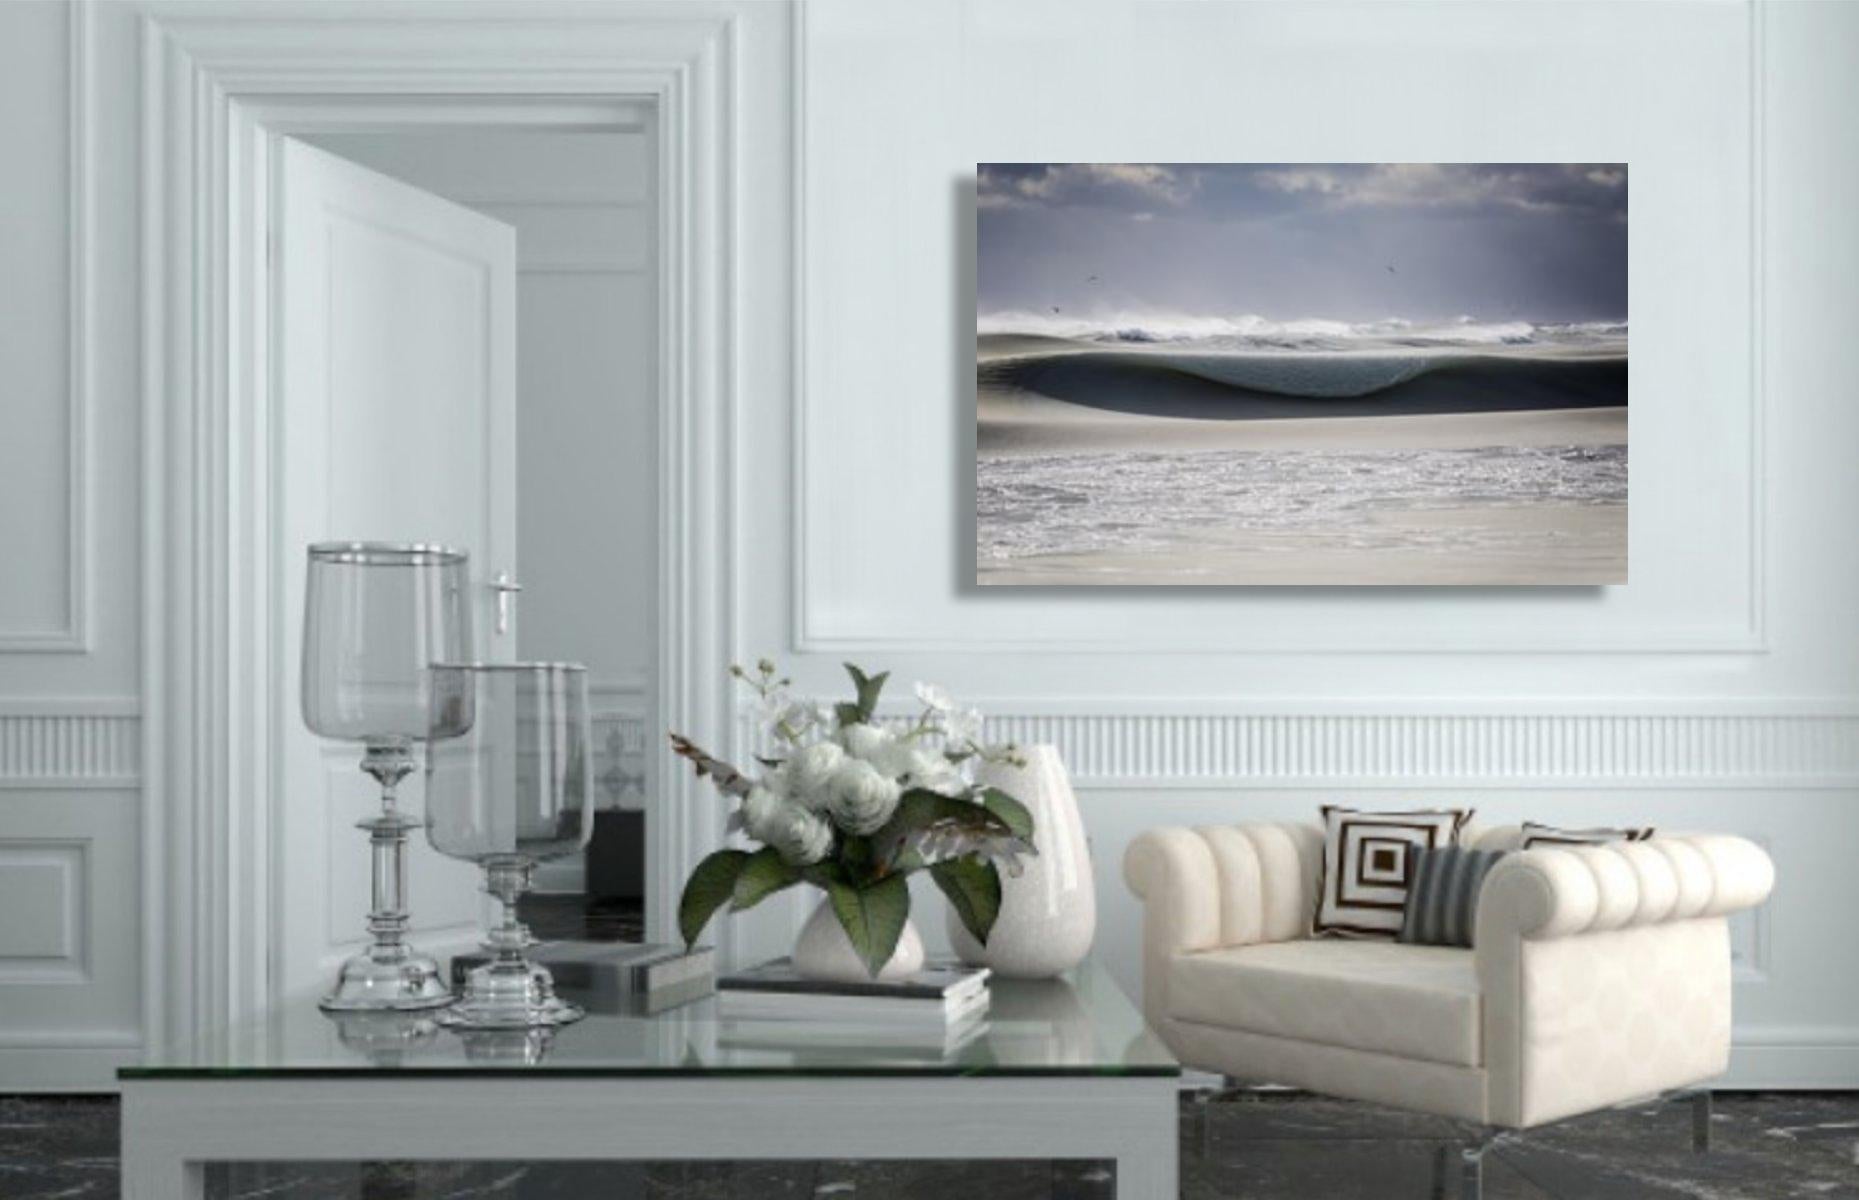 Rock Solid
Limited Edition of 19
30 x 45  inches.
Archival Dye Sublimated Metal Print
Acquired from artists studio 

Nantucket island photography by Jonathan Nimerfroh. Photograph of slurpee waves crashing on the beach. 

Jonathan Nimerfroh is a